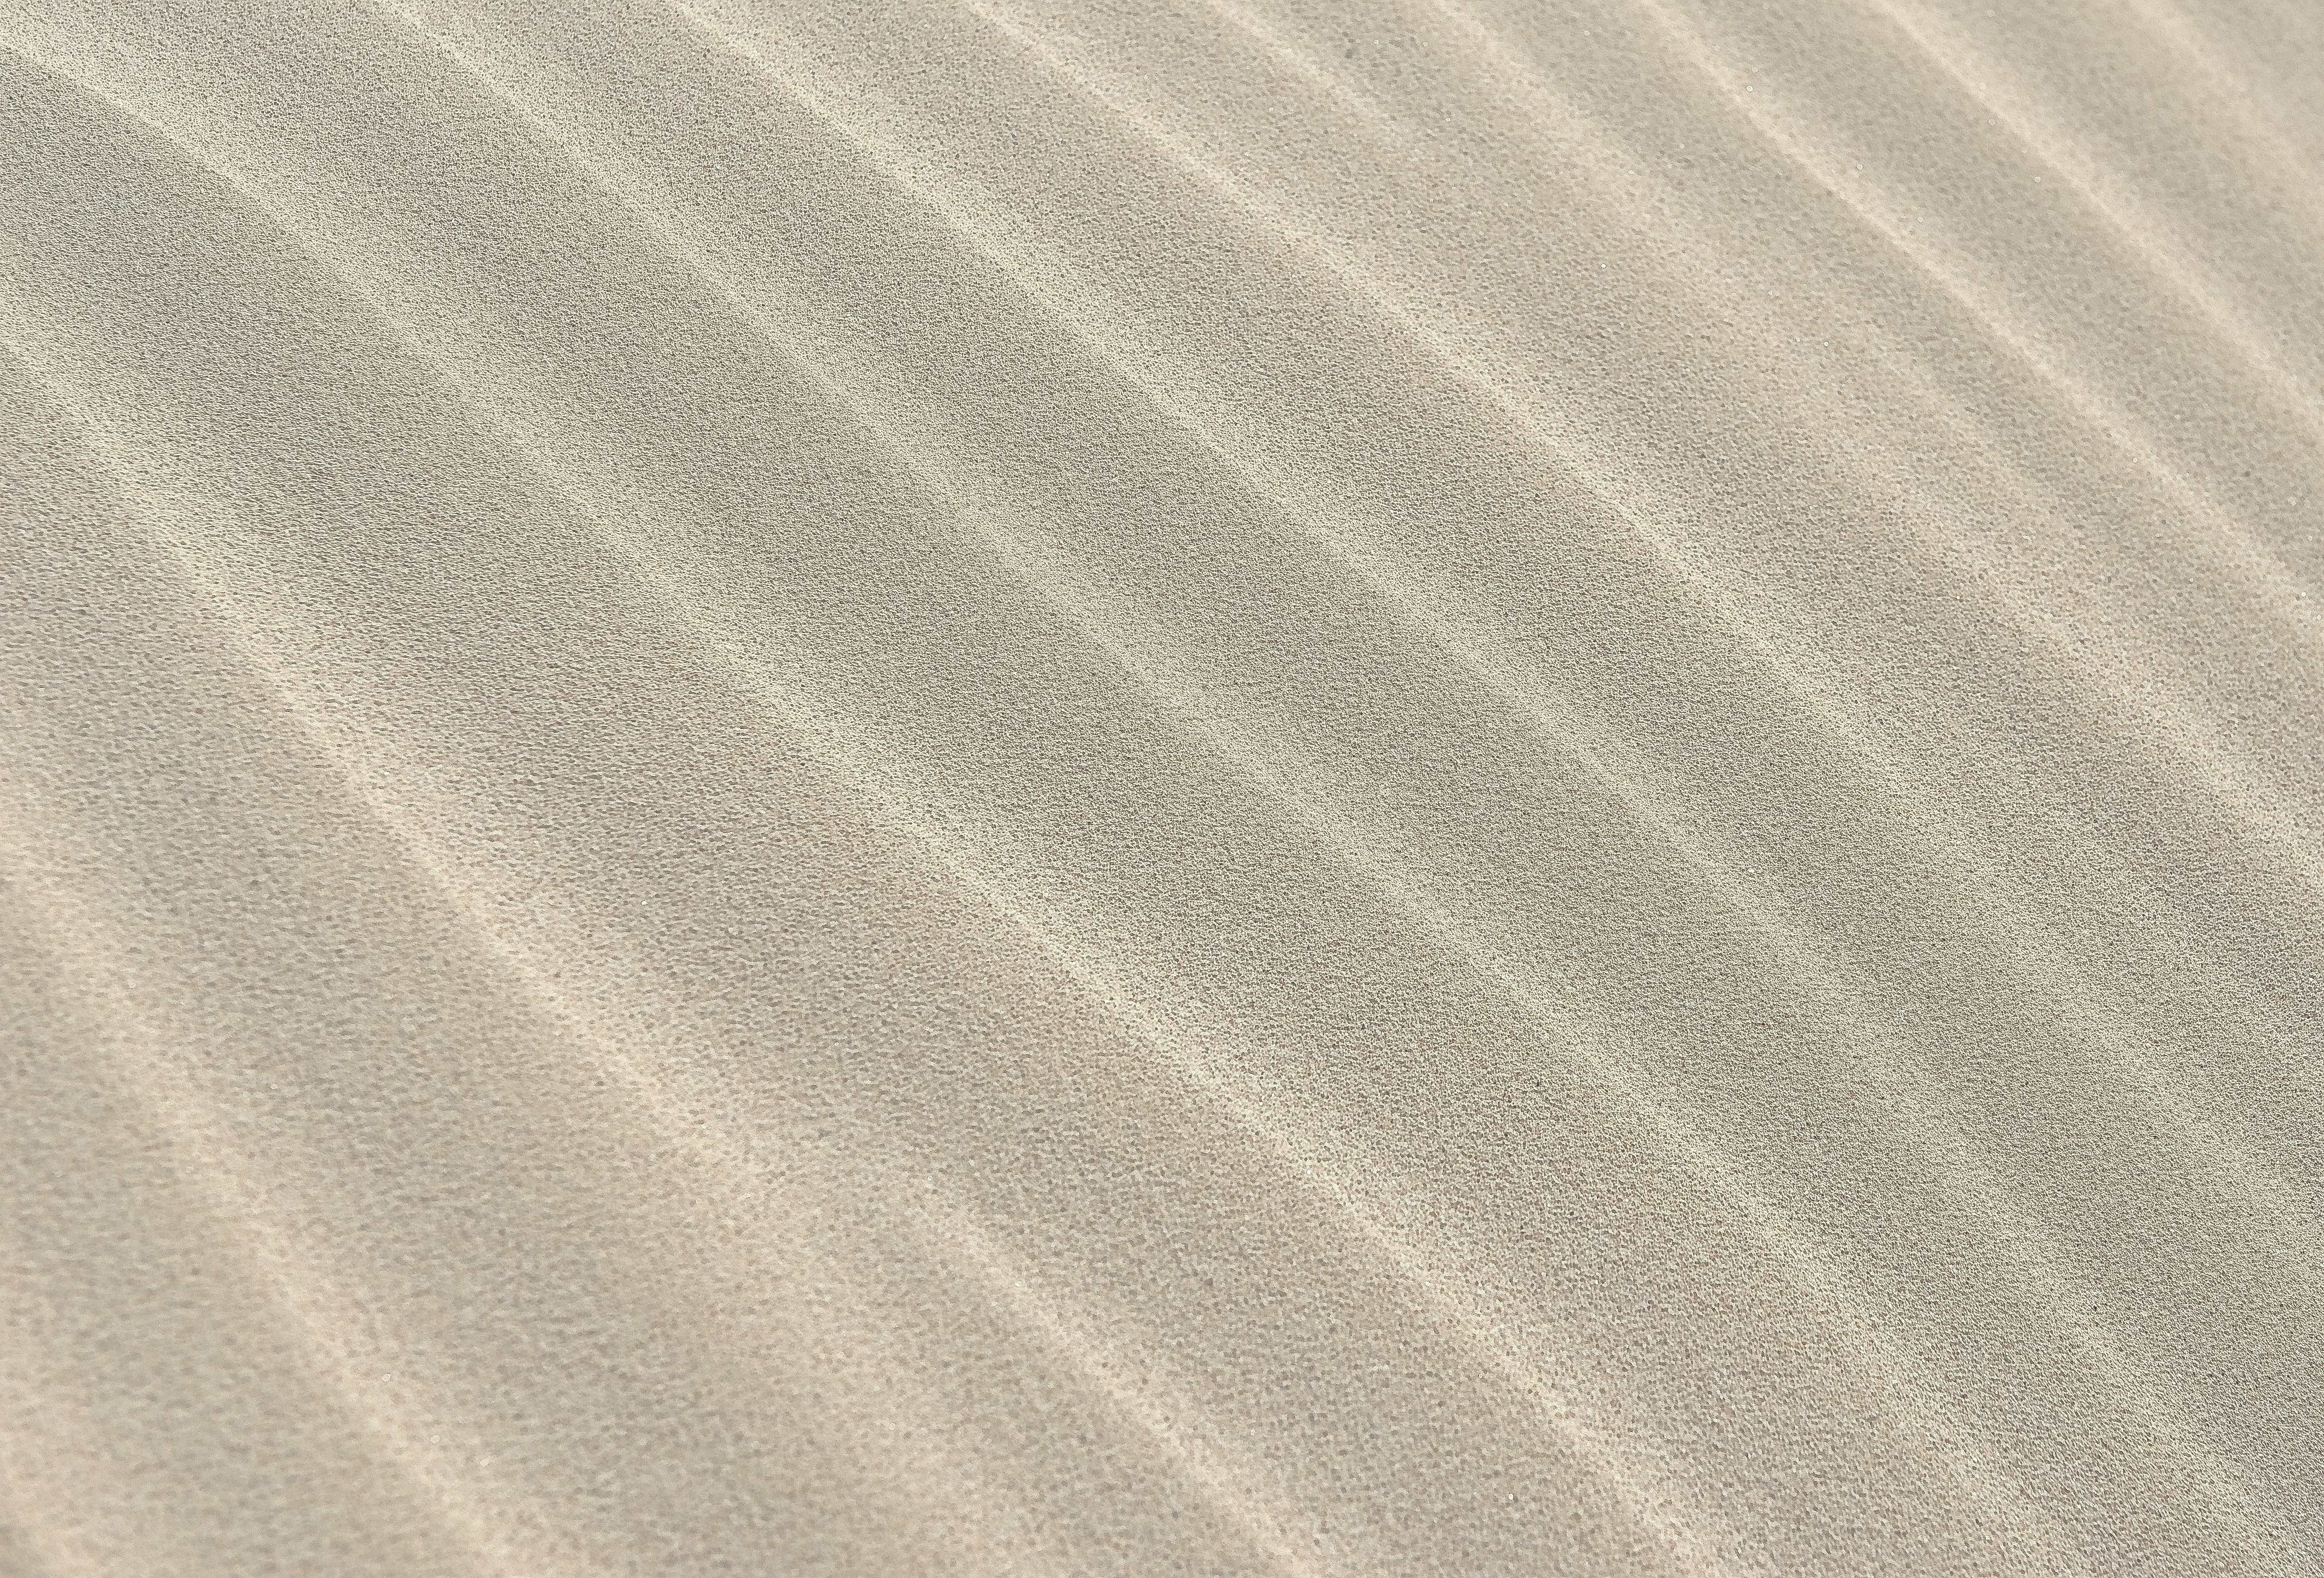 Free photo A background of sand in the desert